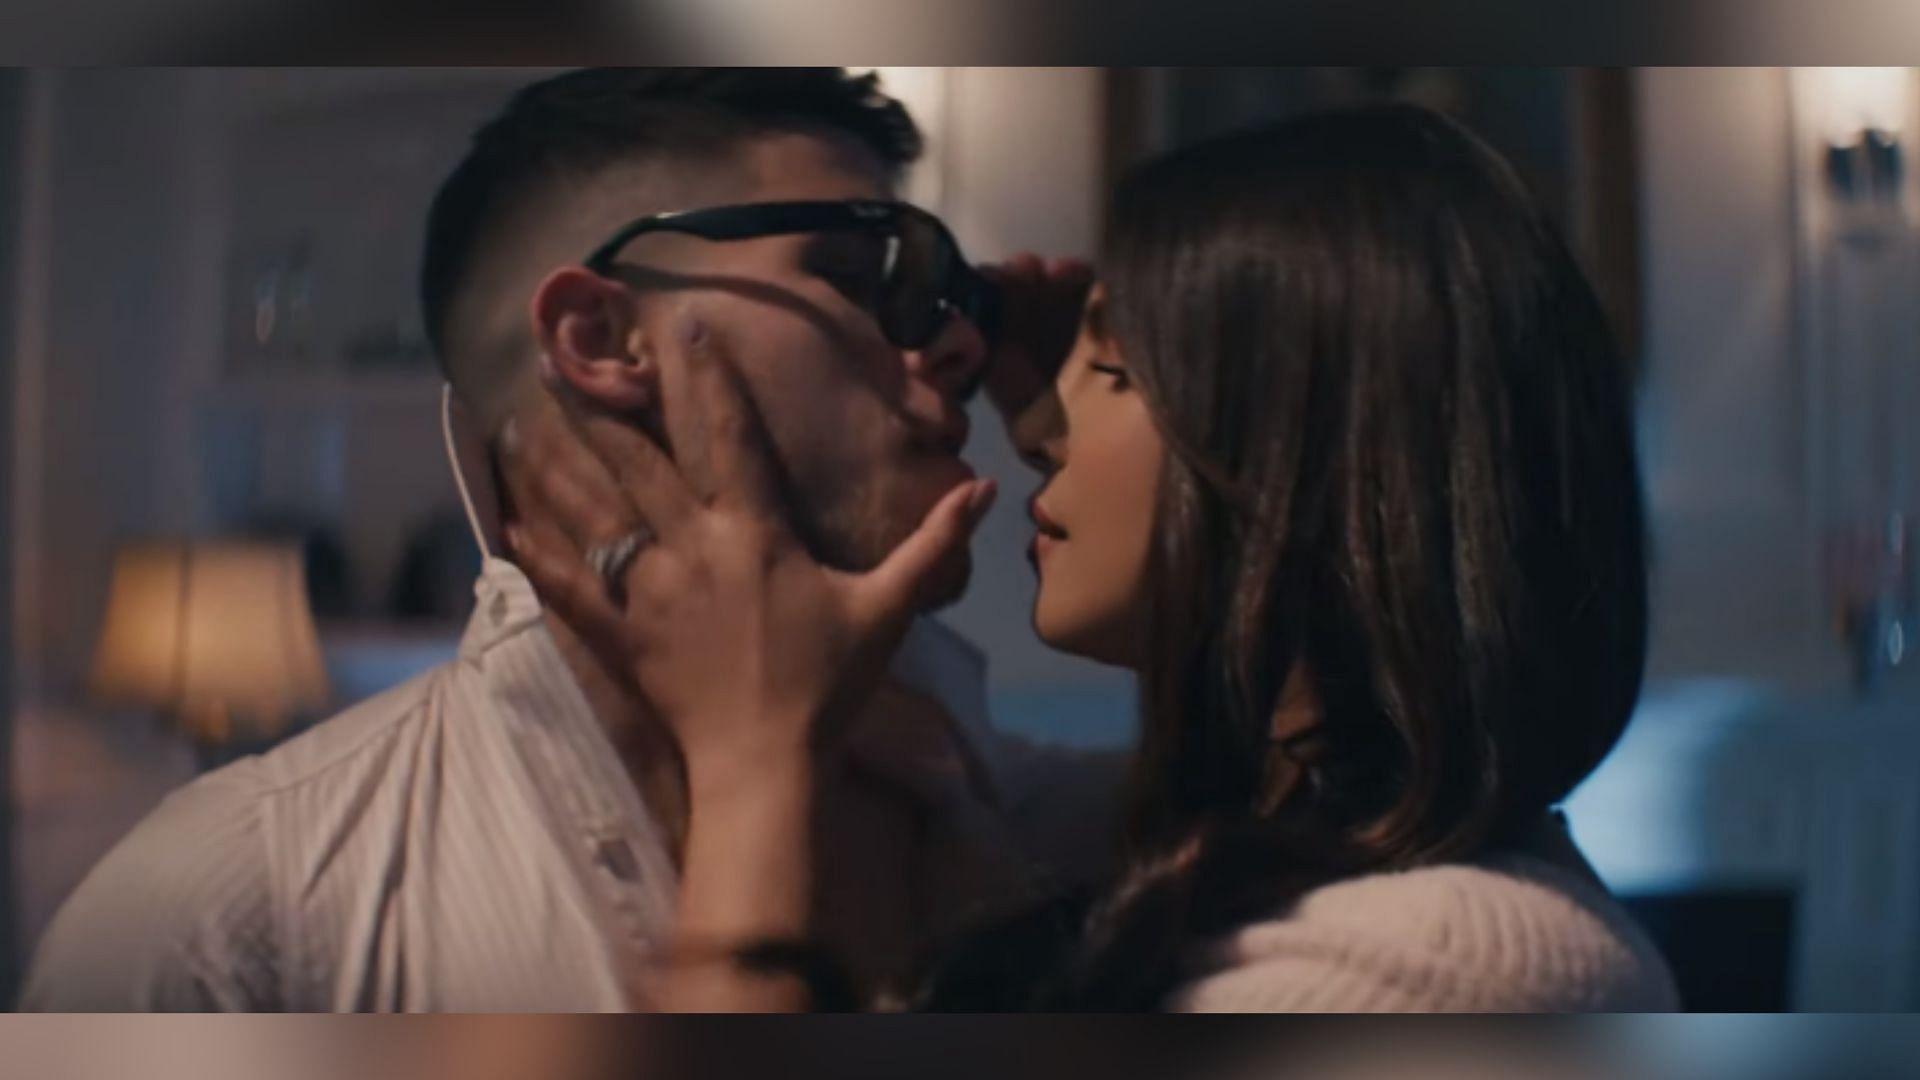 Nick and Priyanka in a still from the video.